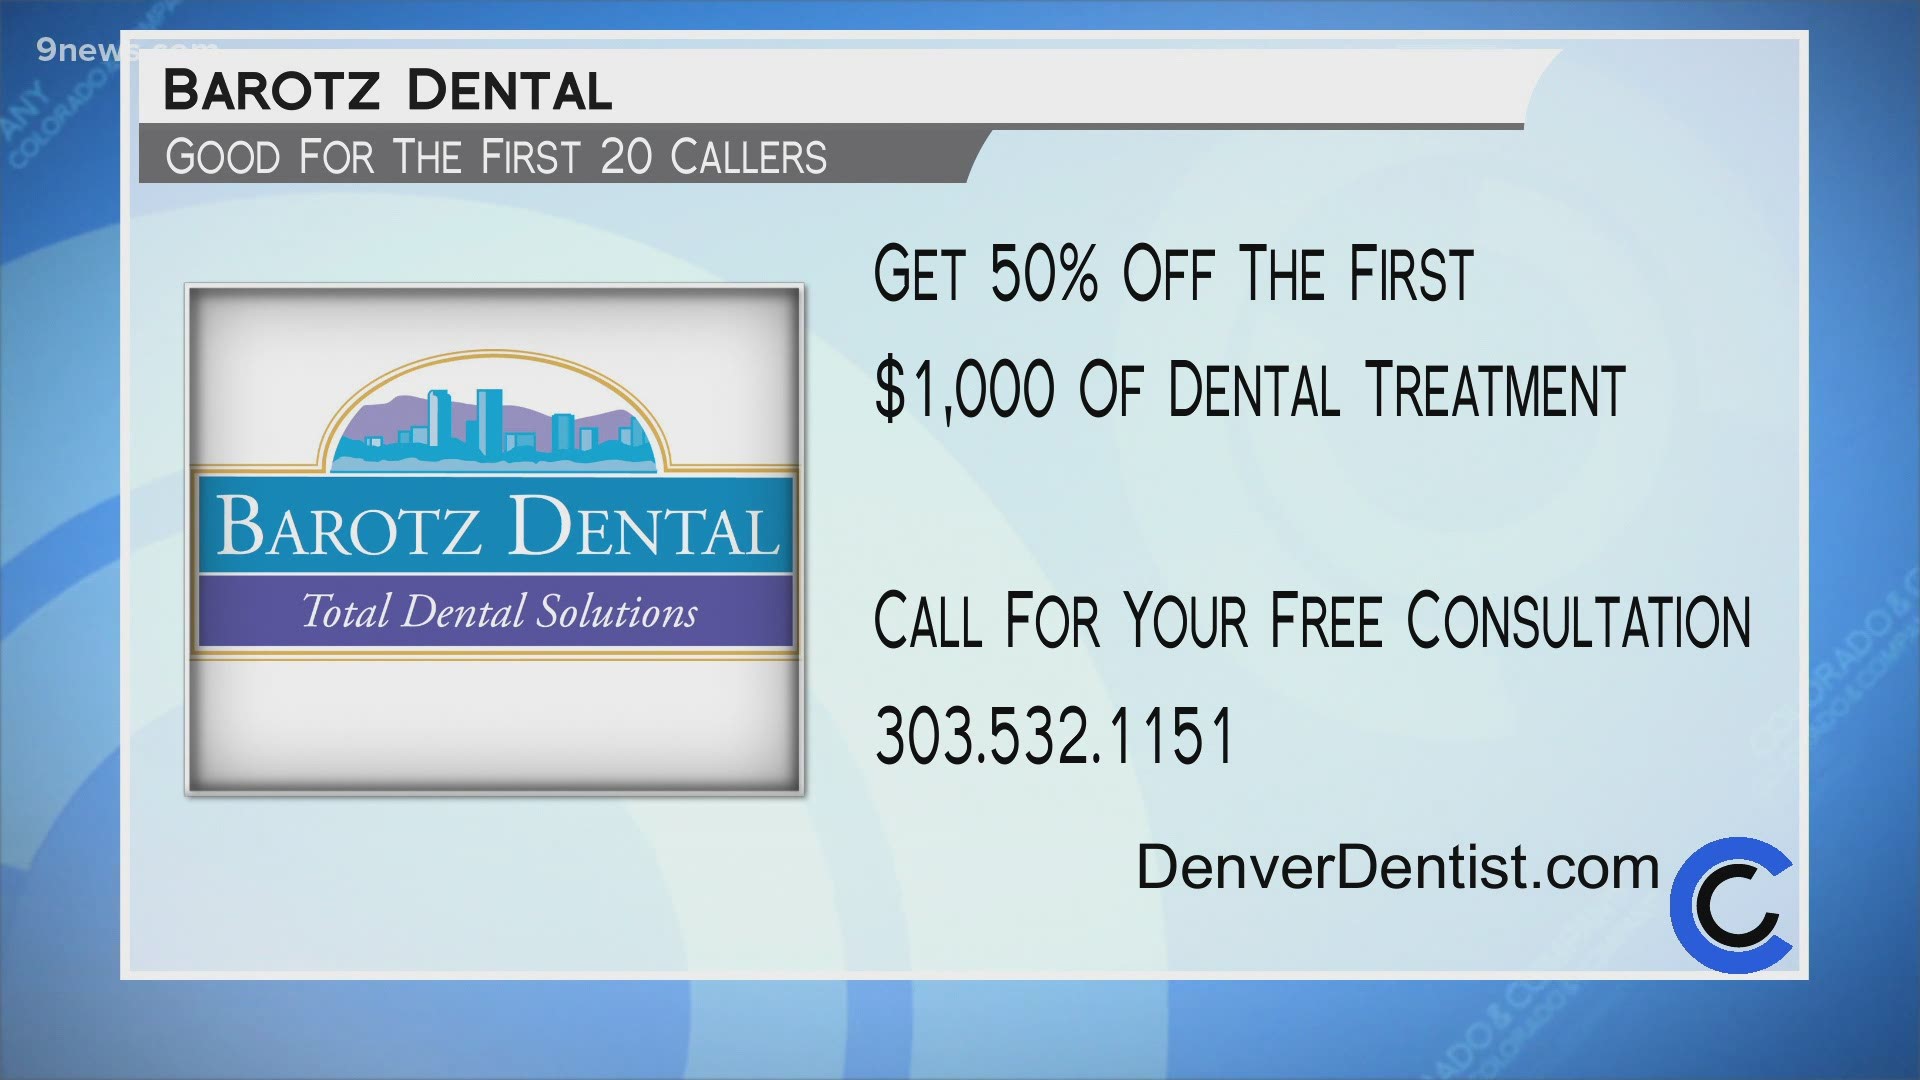 Call Dr. Barotz and his team at 303.532.1151 and let them help you get your smile back. Learn more about a free consultation at DenverDentist.com.